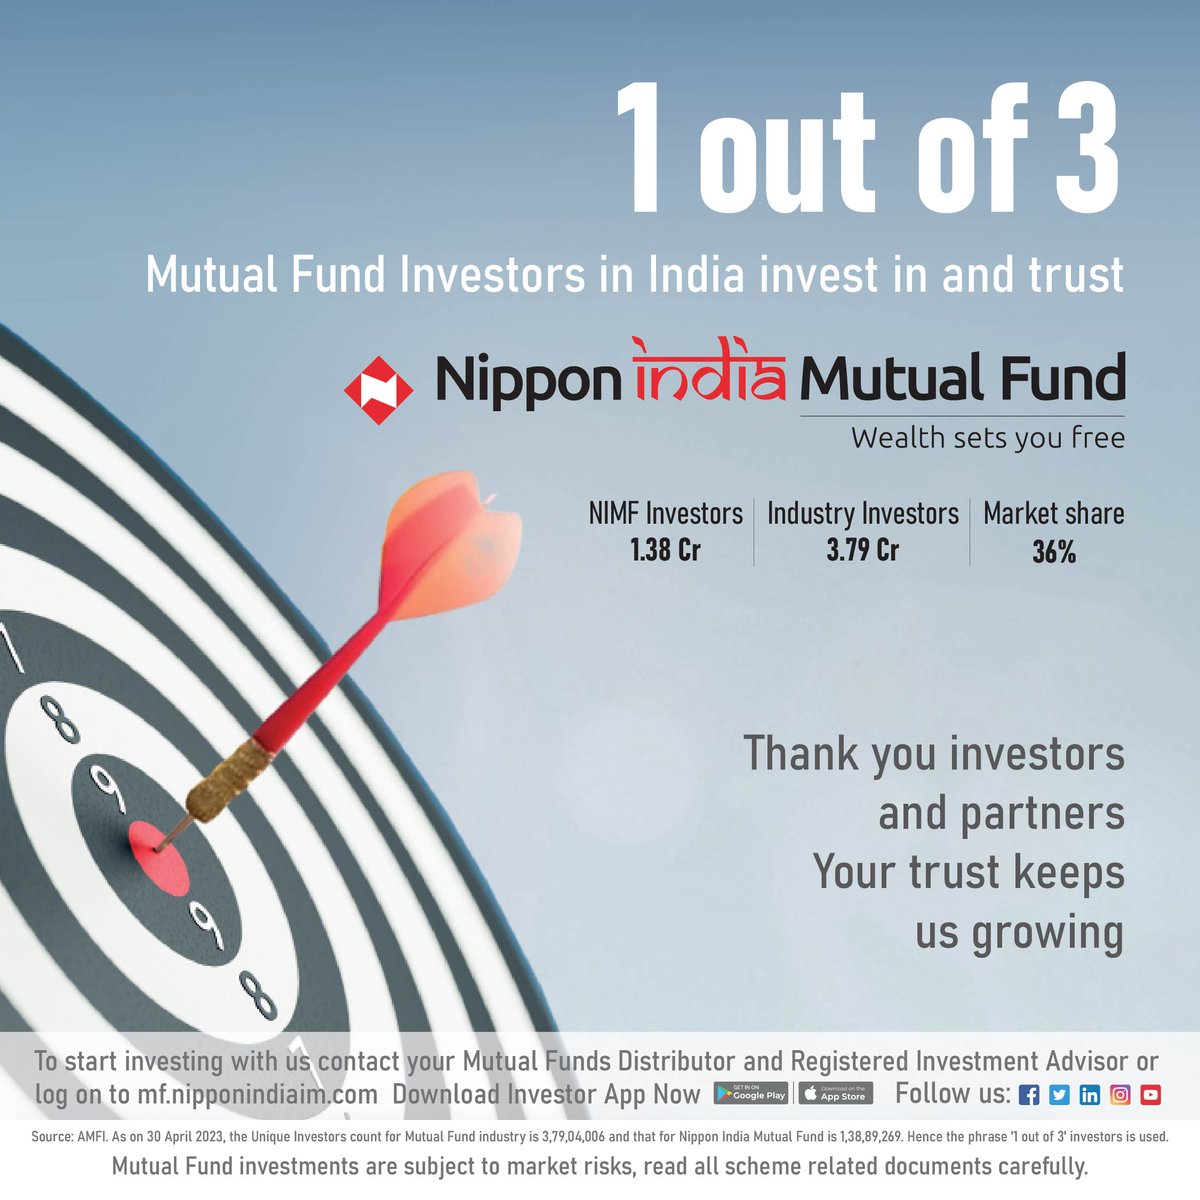 We express our humble gratitude to our investors and partners; whose trust & faith has led to 1 out of 3 mutual fund investors in India investing through us!
We look forward to partnering with you even more meaningfully in future.

#NipponIndiaMutualFund #Milestone #Gratitude